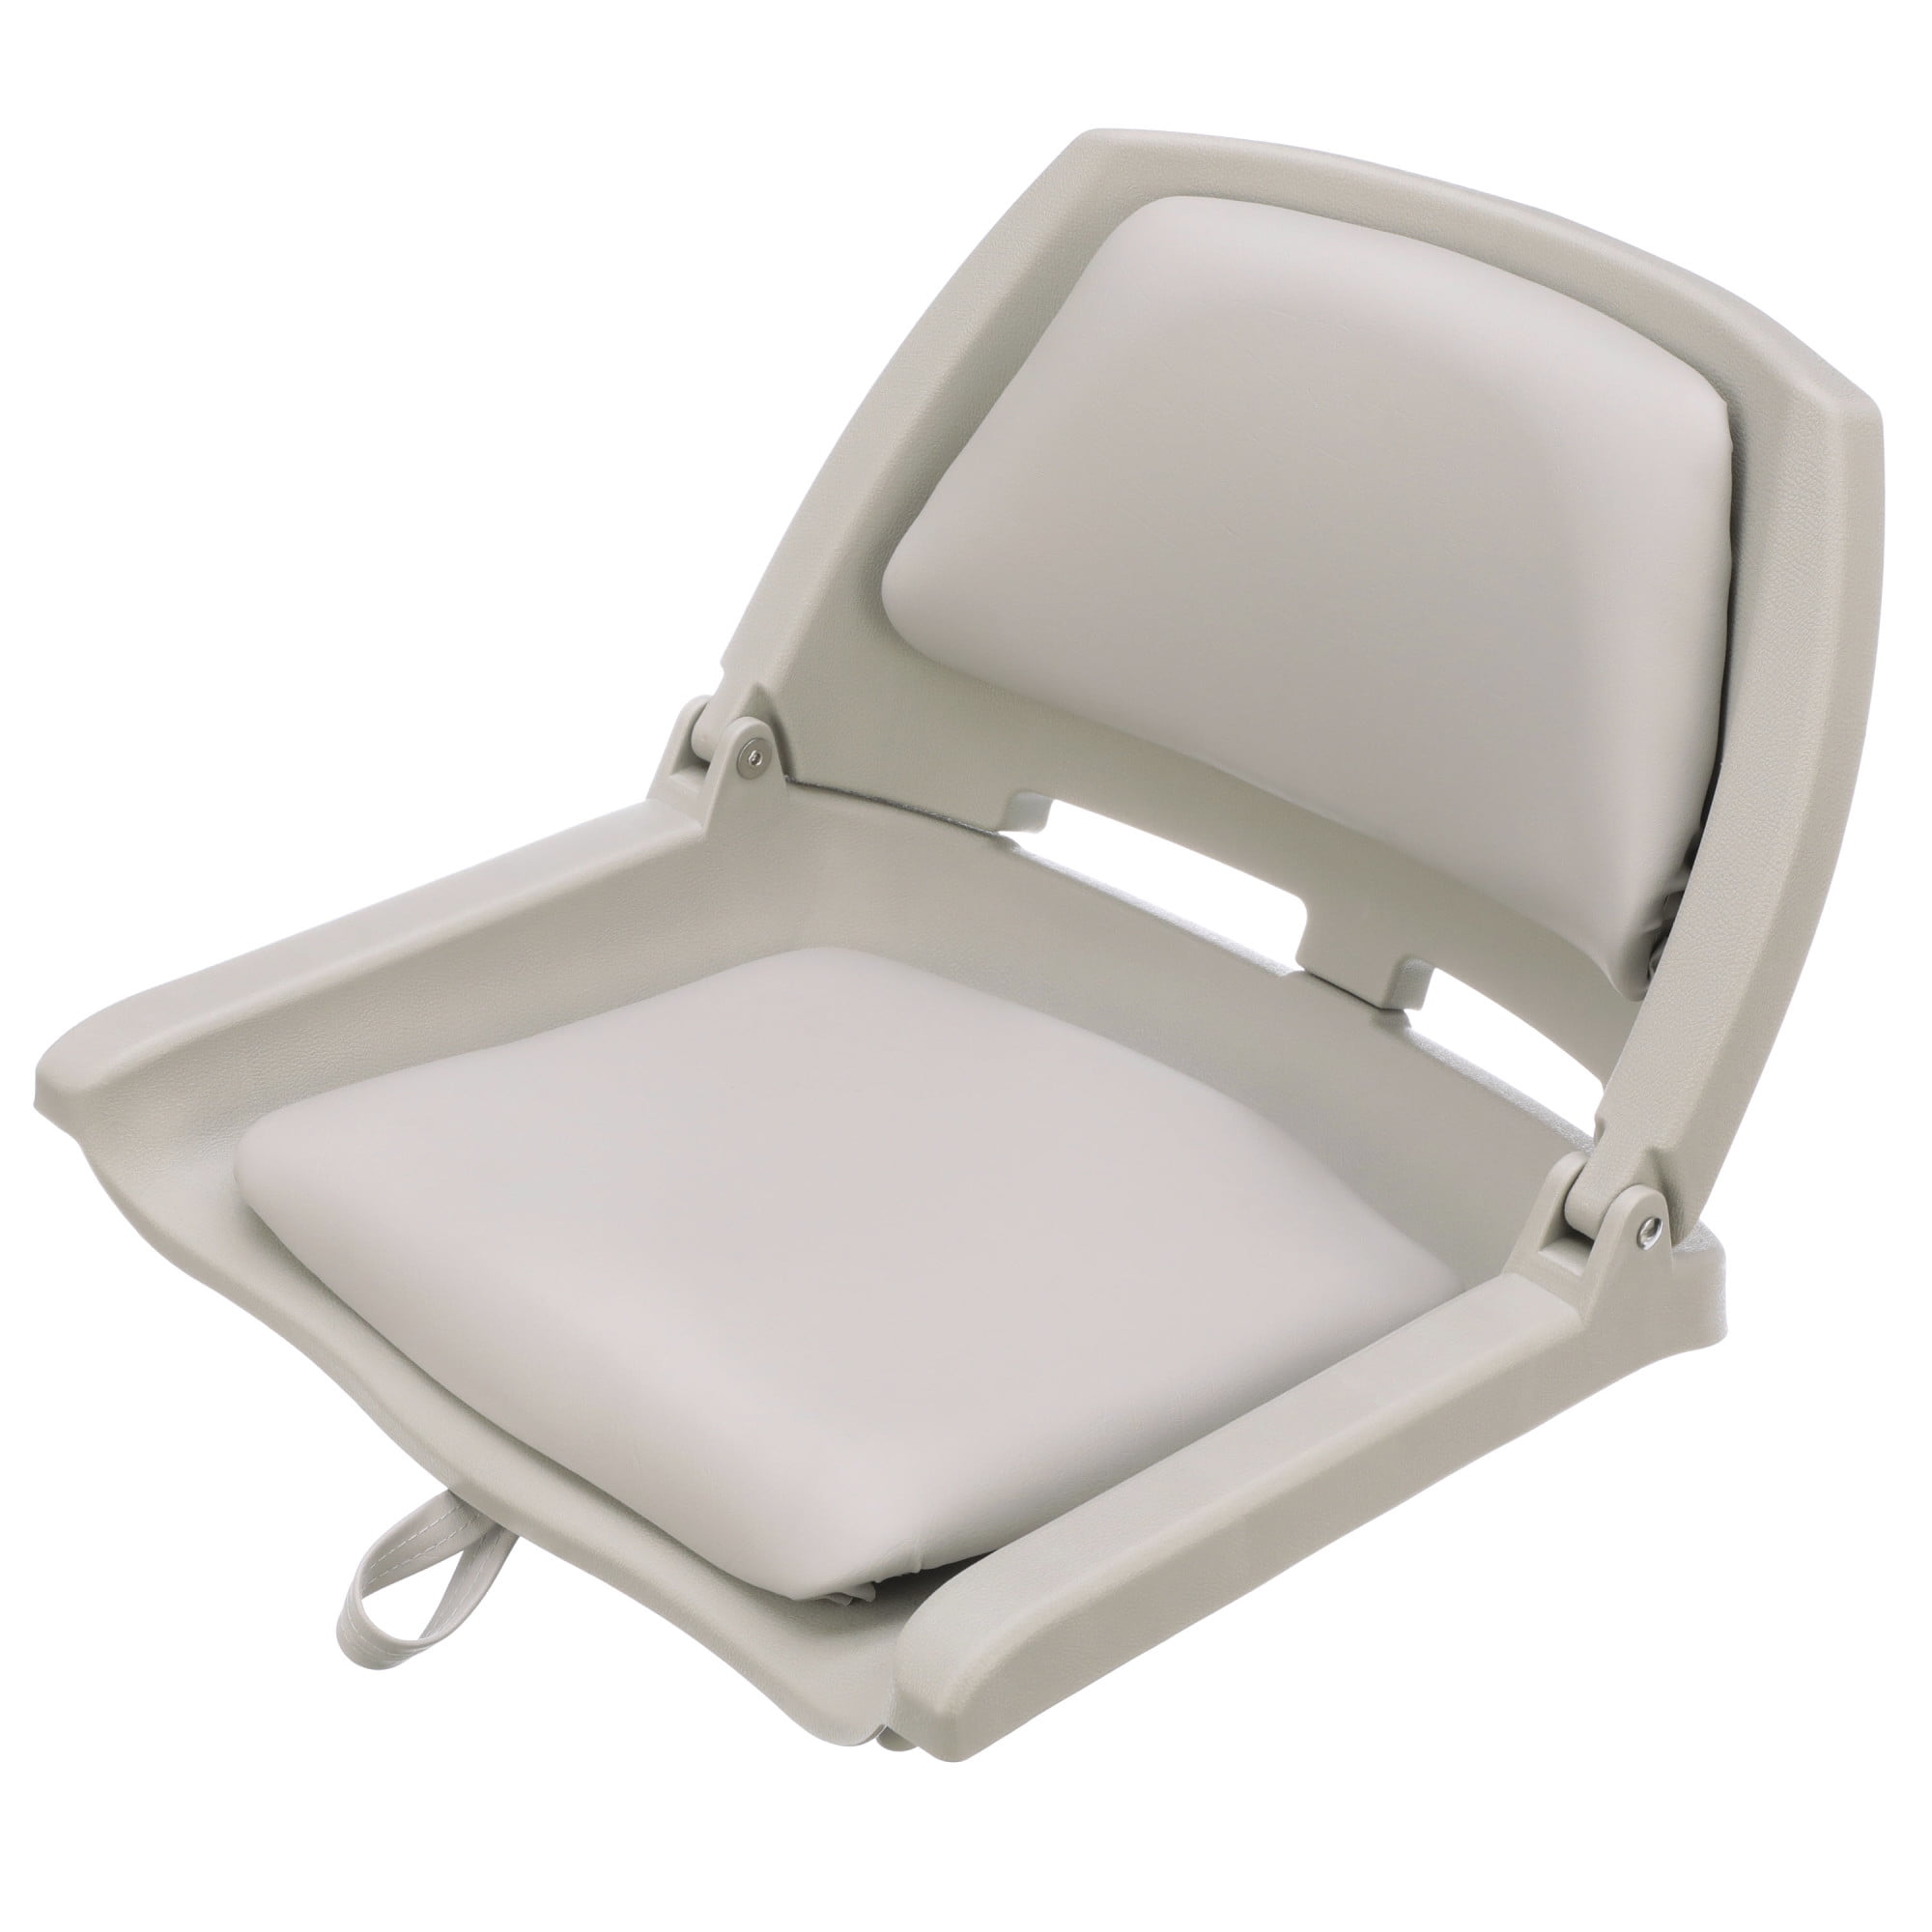 NEW  and FREESHIPPING Attwood 98395GY Low-Back Padded Boat Seat 